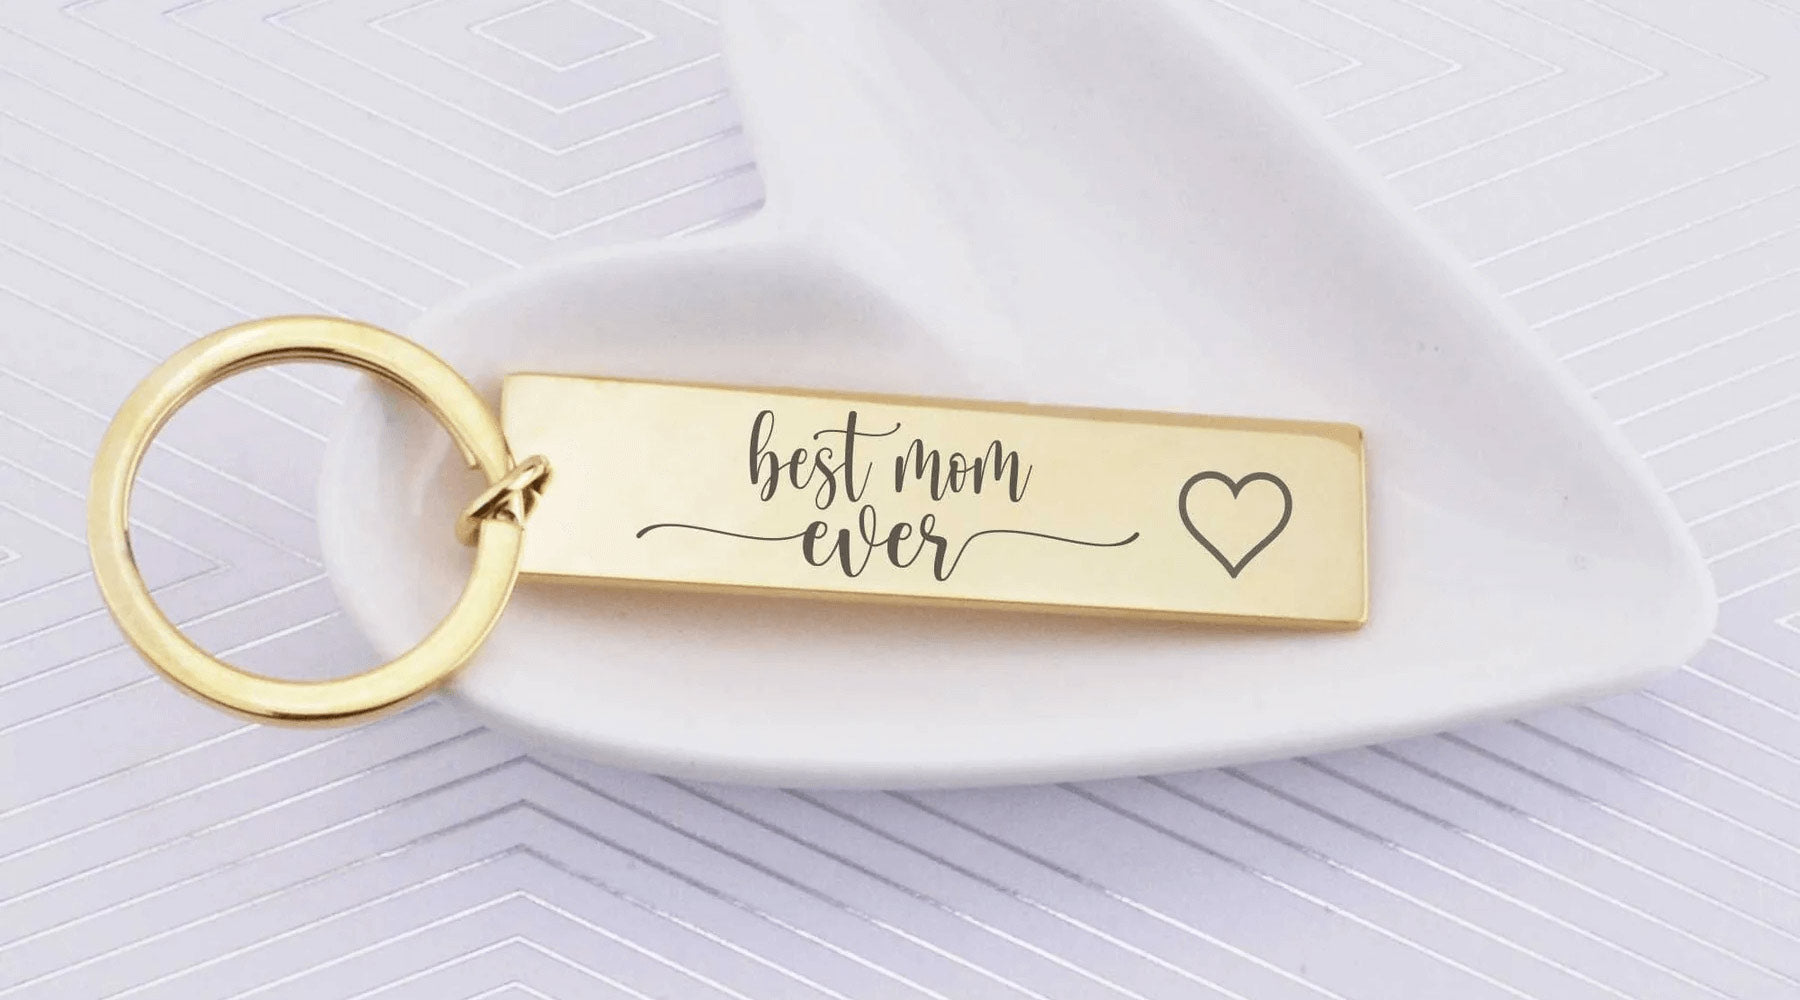 5 Unique Mother's Day Gifts that Mom and Grandma Will Love